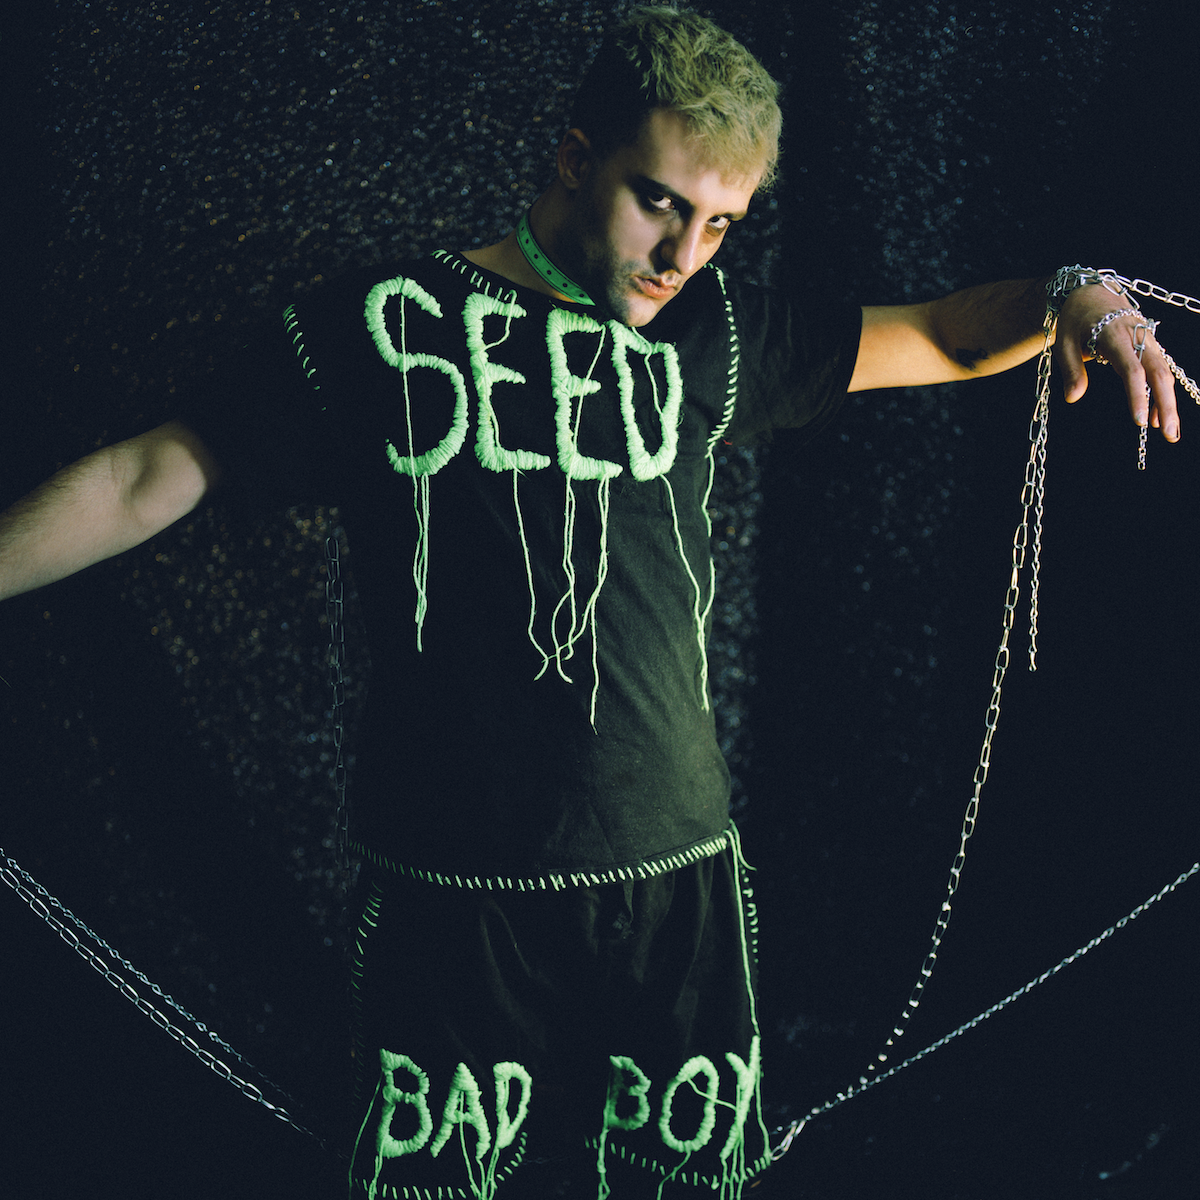 Scotty Seed releases music video for new single “Hallows Eve”